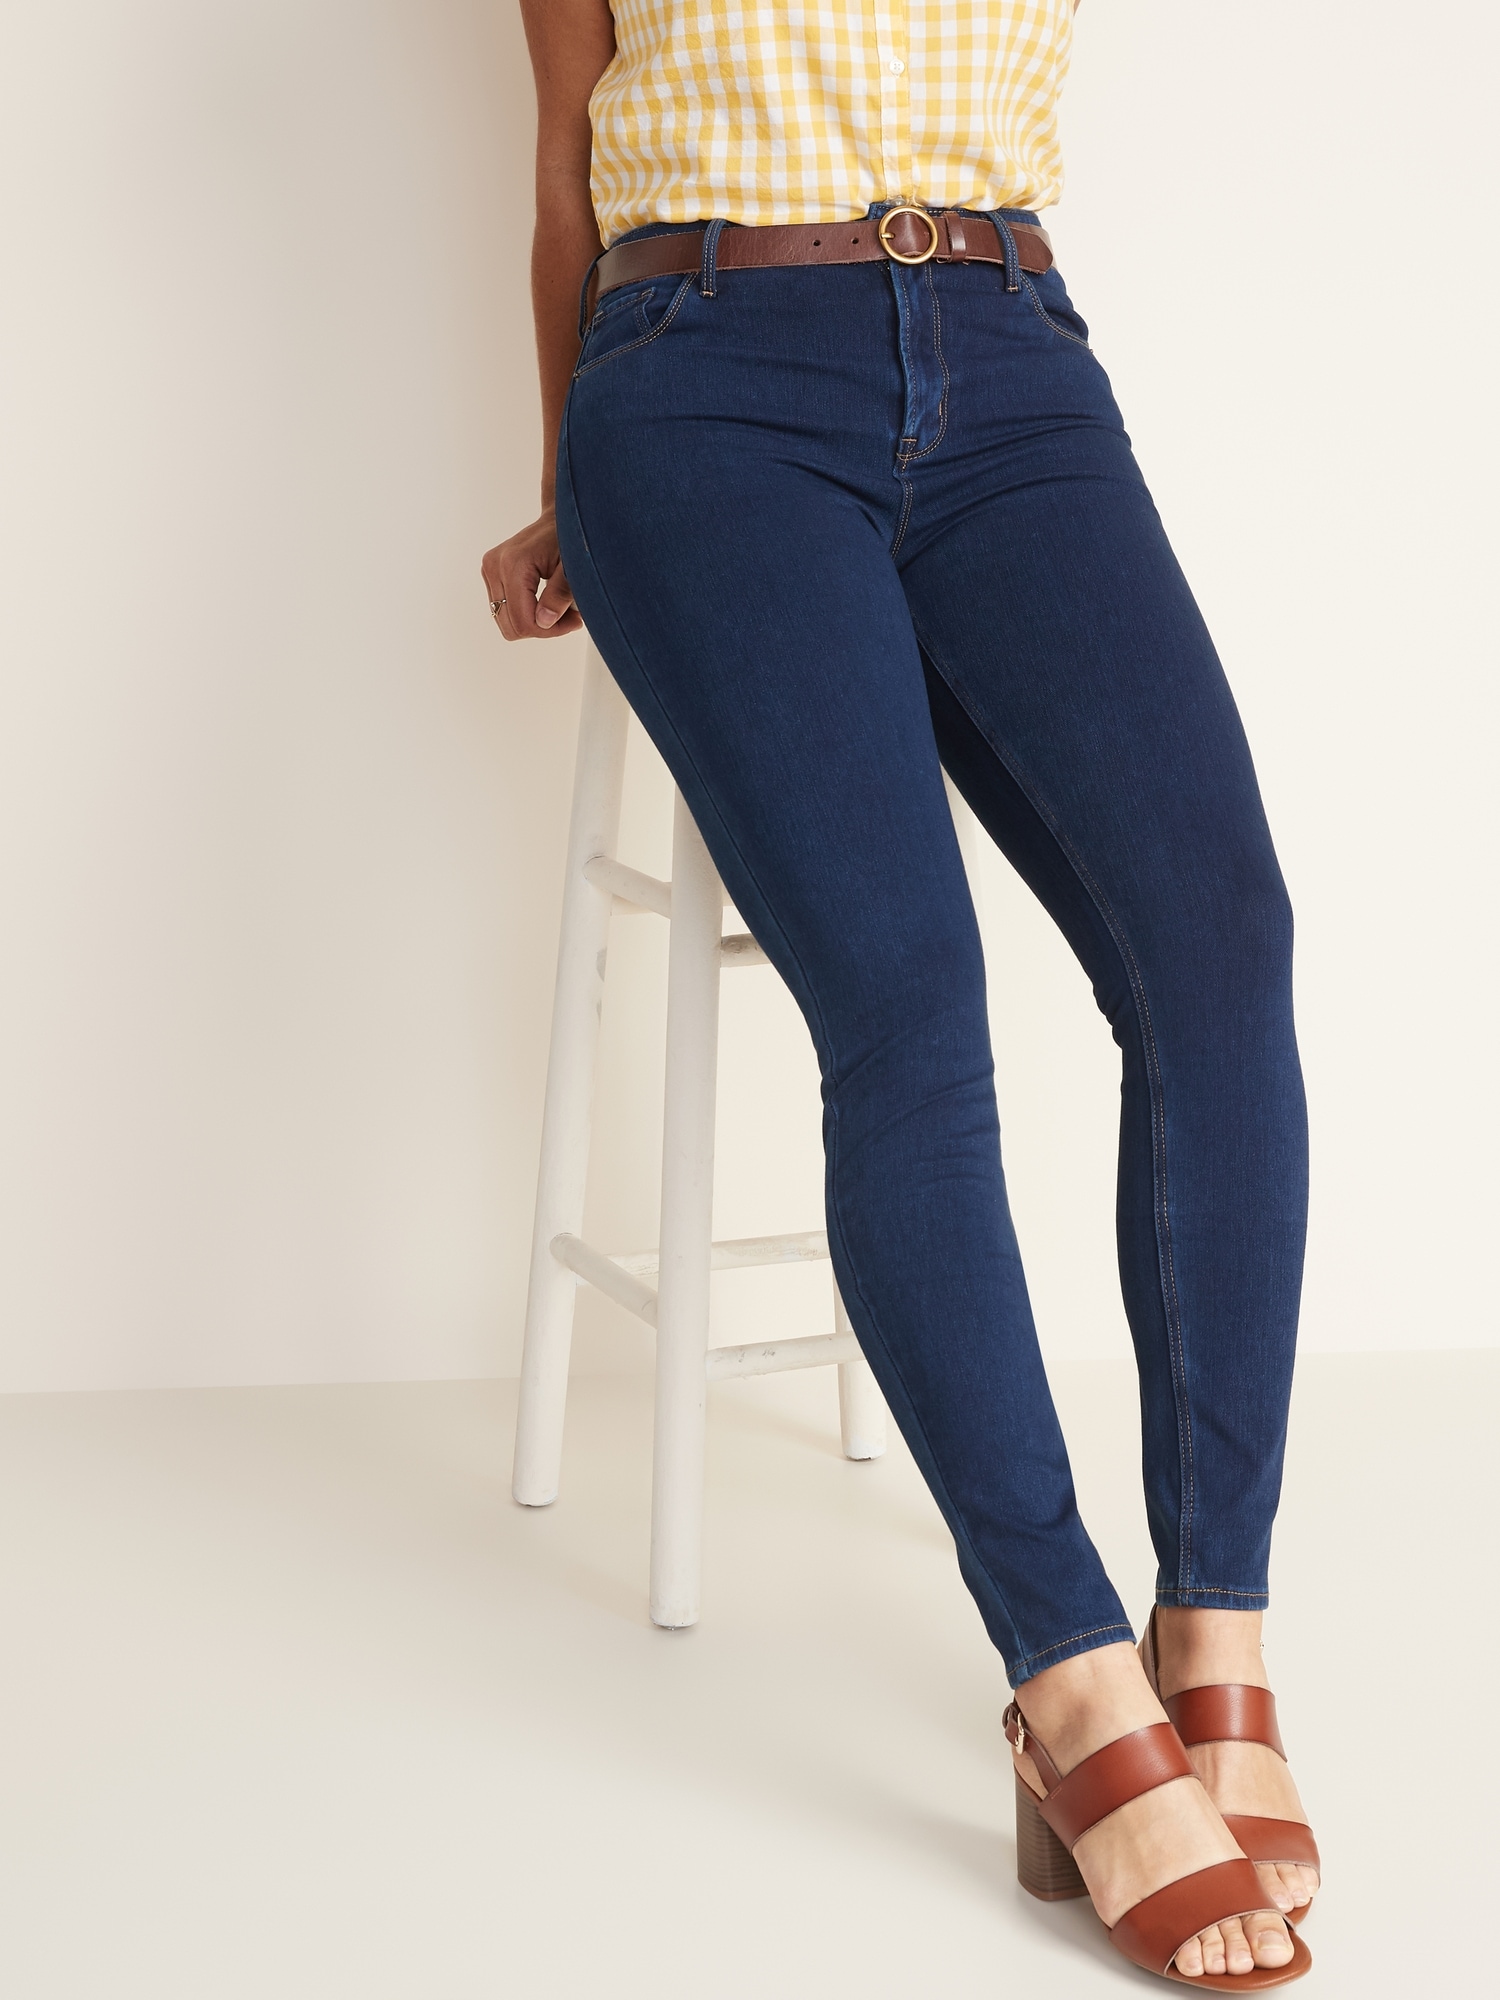 old navy super skinny jeans review